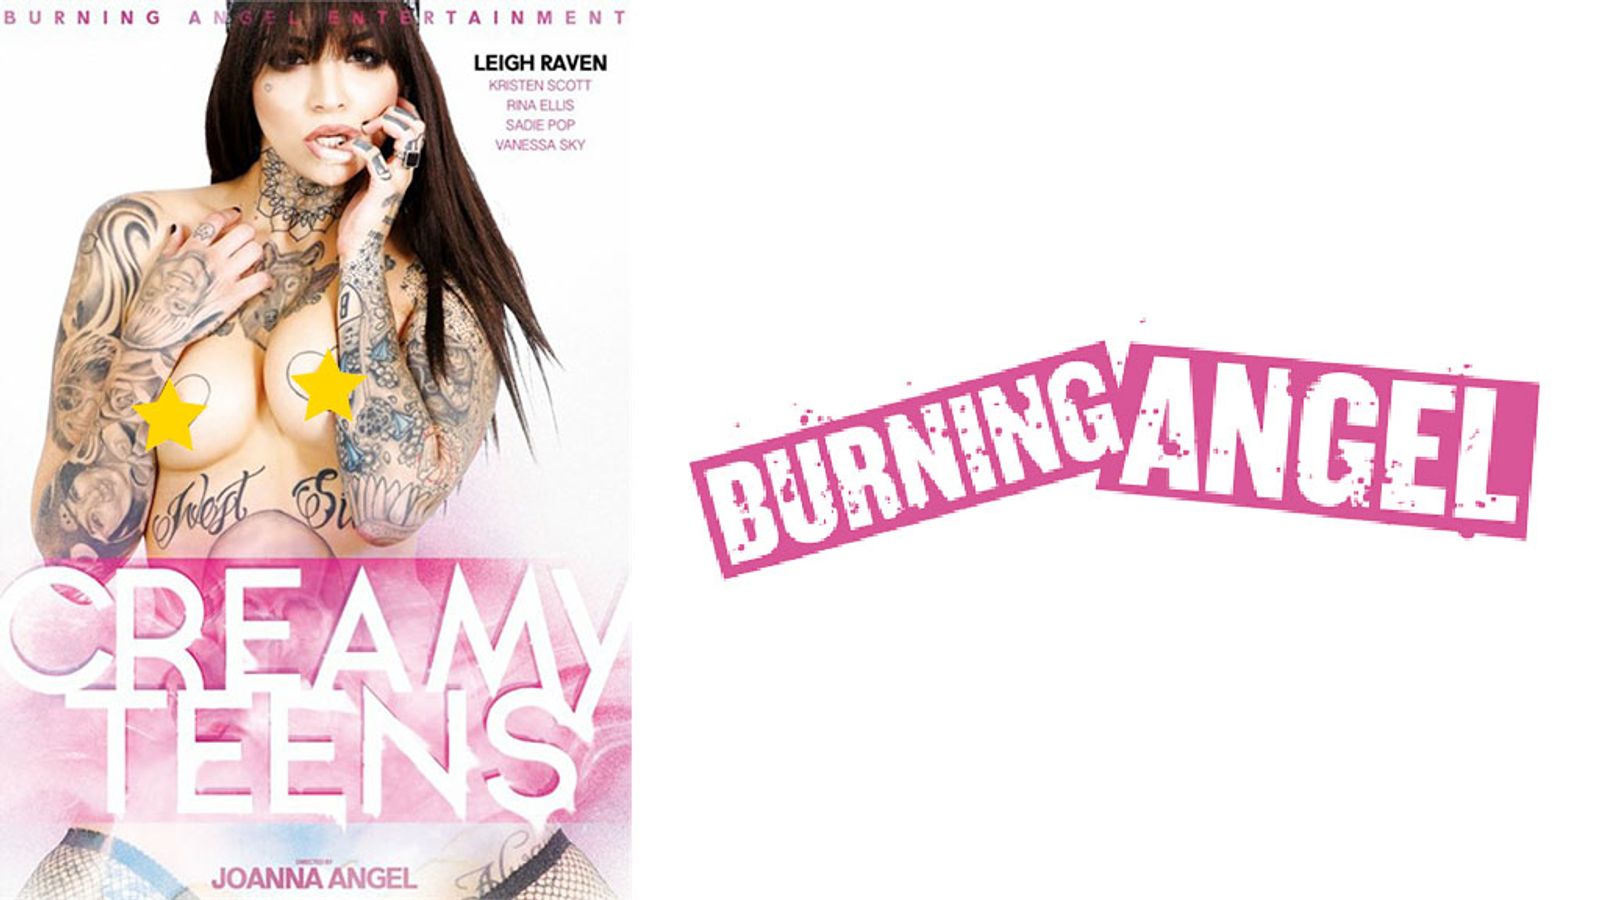 BurningAngel Gals All Say 'Fill 'Er Up' In 'Creamy Teens'